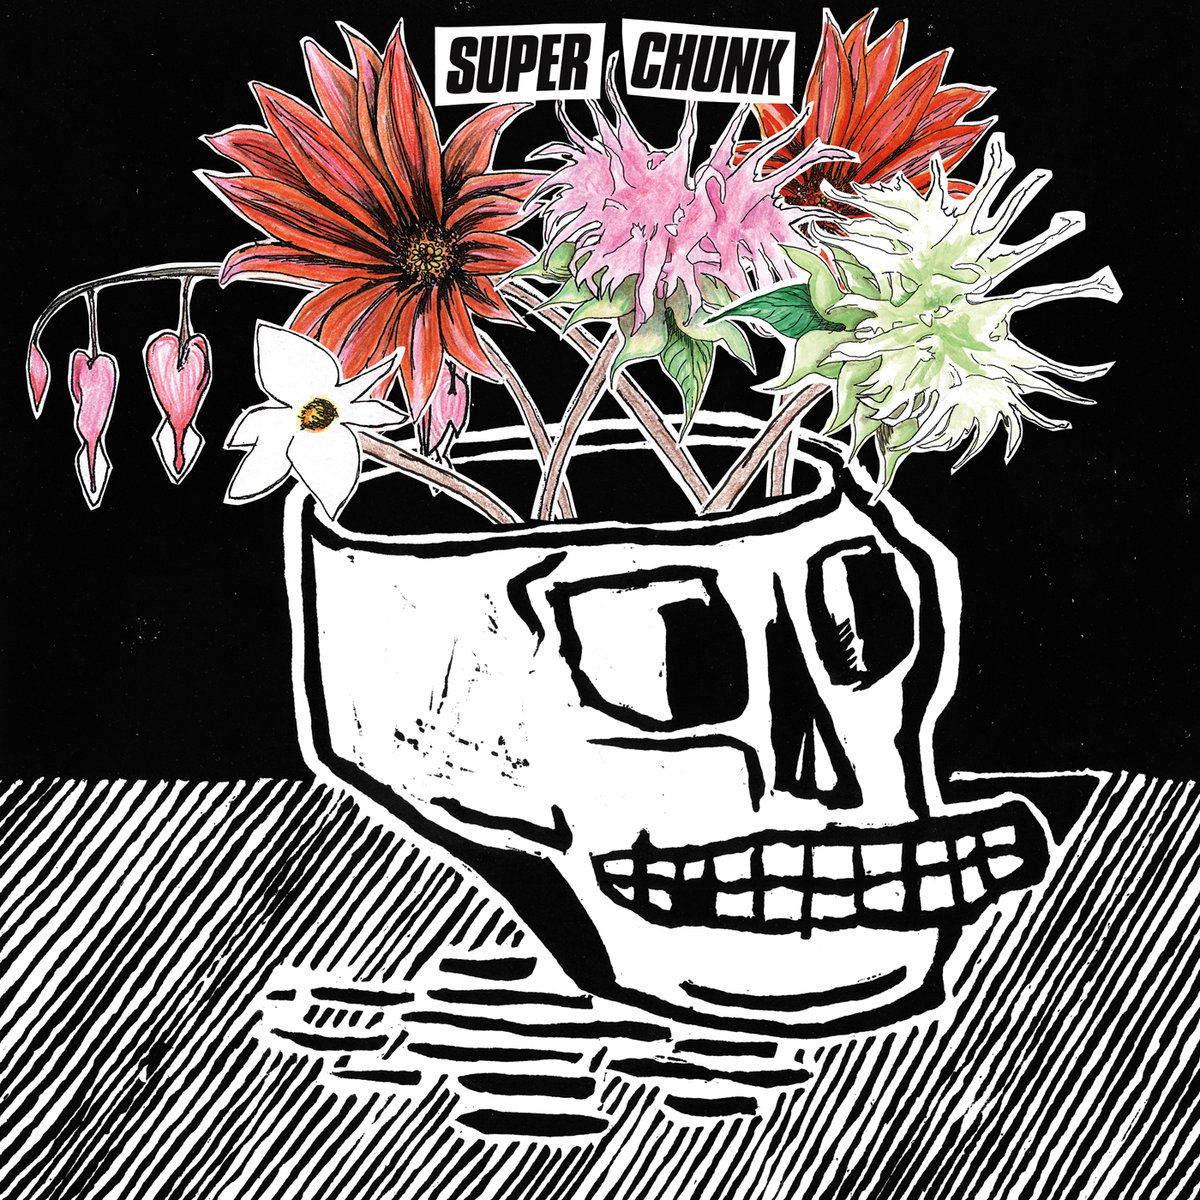 Northern Transmissions' reveiew of 'What A Time To Be Alive' by Superchunk